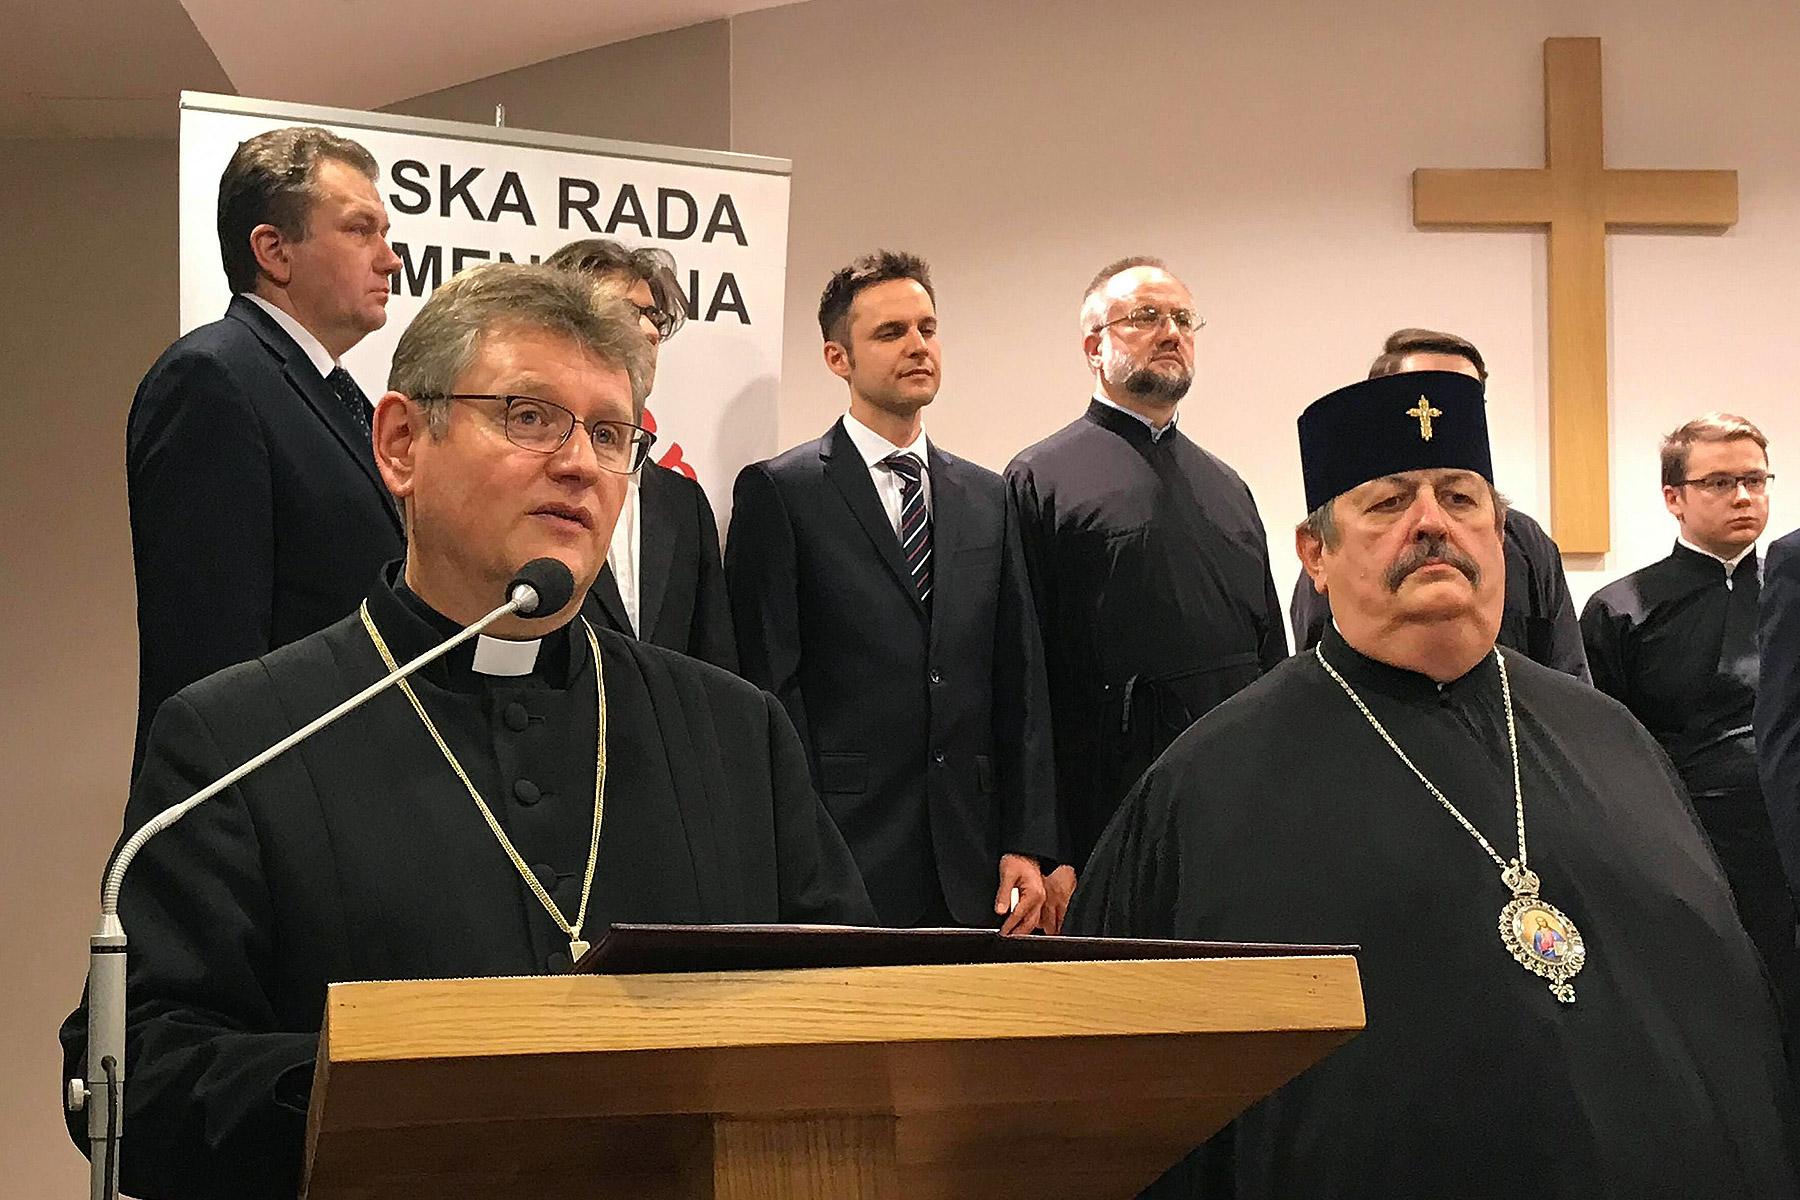 From left: Lutheran Bishop Jerzy Samiec, President of the Polish Ecumencial Council and Orthodox Archbishop Abel, Diocese of Lublin-CheÅm of the Church of Poland. Photo: PEC